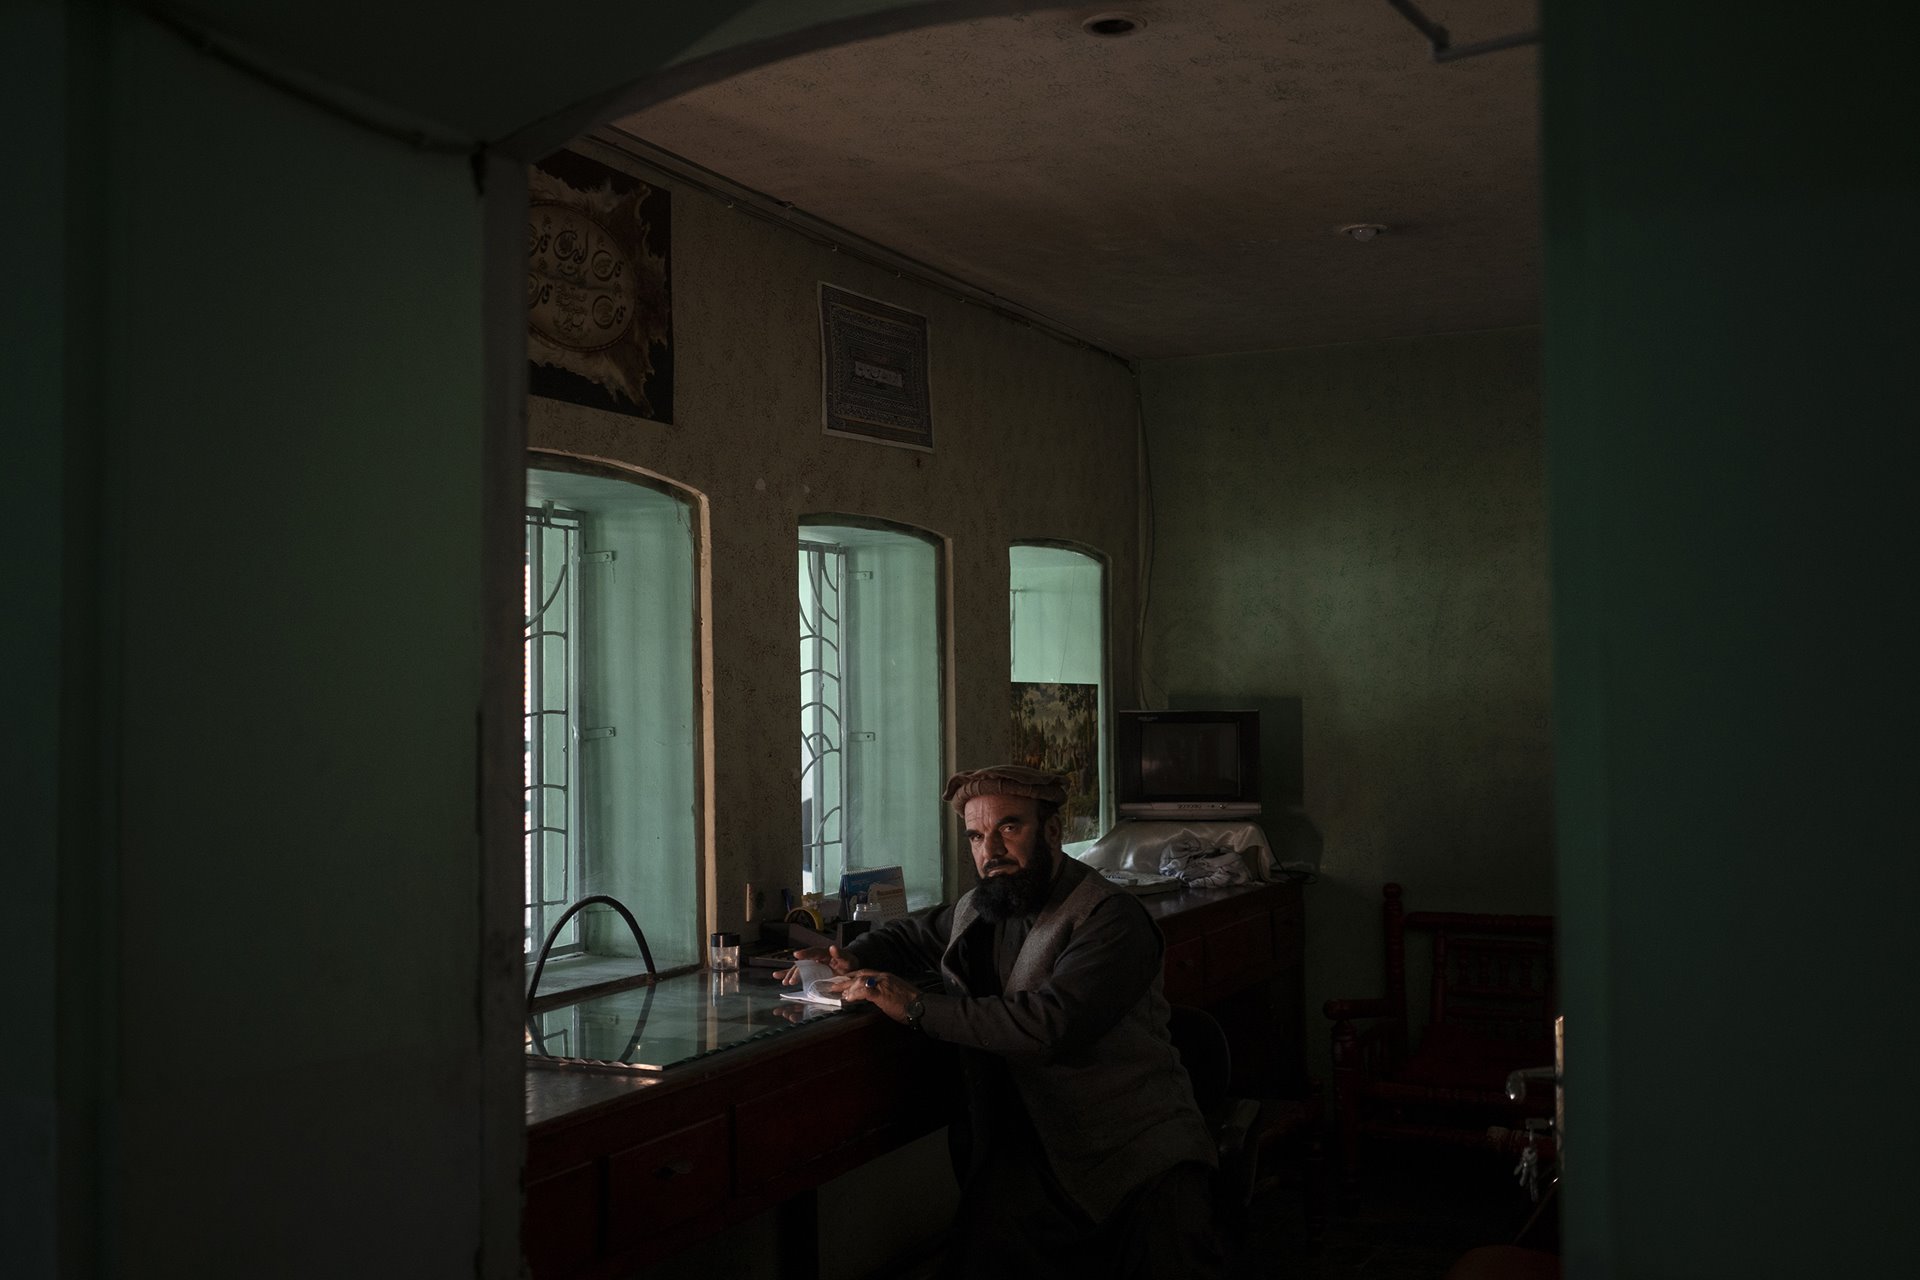 Abdul Malik Wahidi, who sells tickets at Ariana Cinema, in Kabul, Afghanistan, poses for a photograph in the ticket office. Nearly three months after the Taliban closed the government-owned cinema, the staff still arrive for work in the hope that they will be paid.